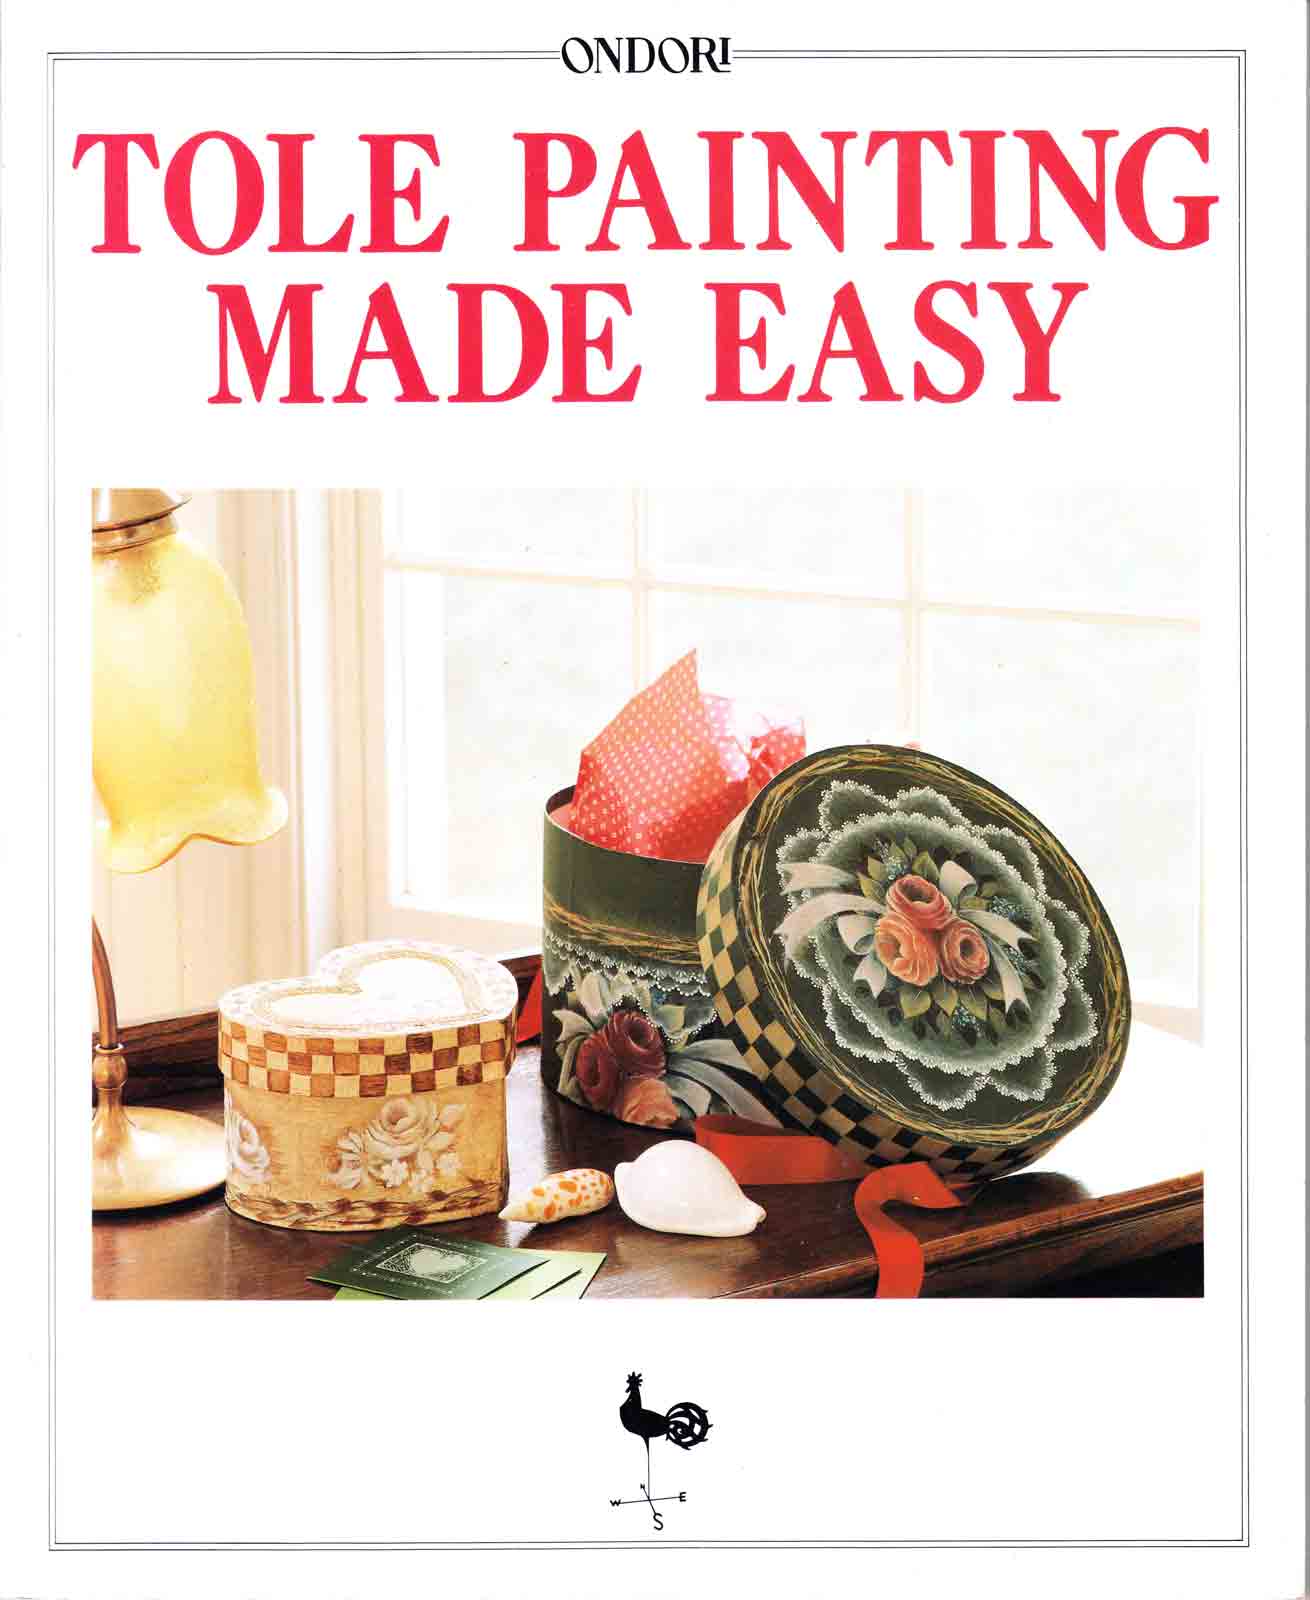 Tole-painting-made-easy